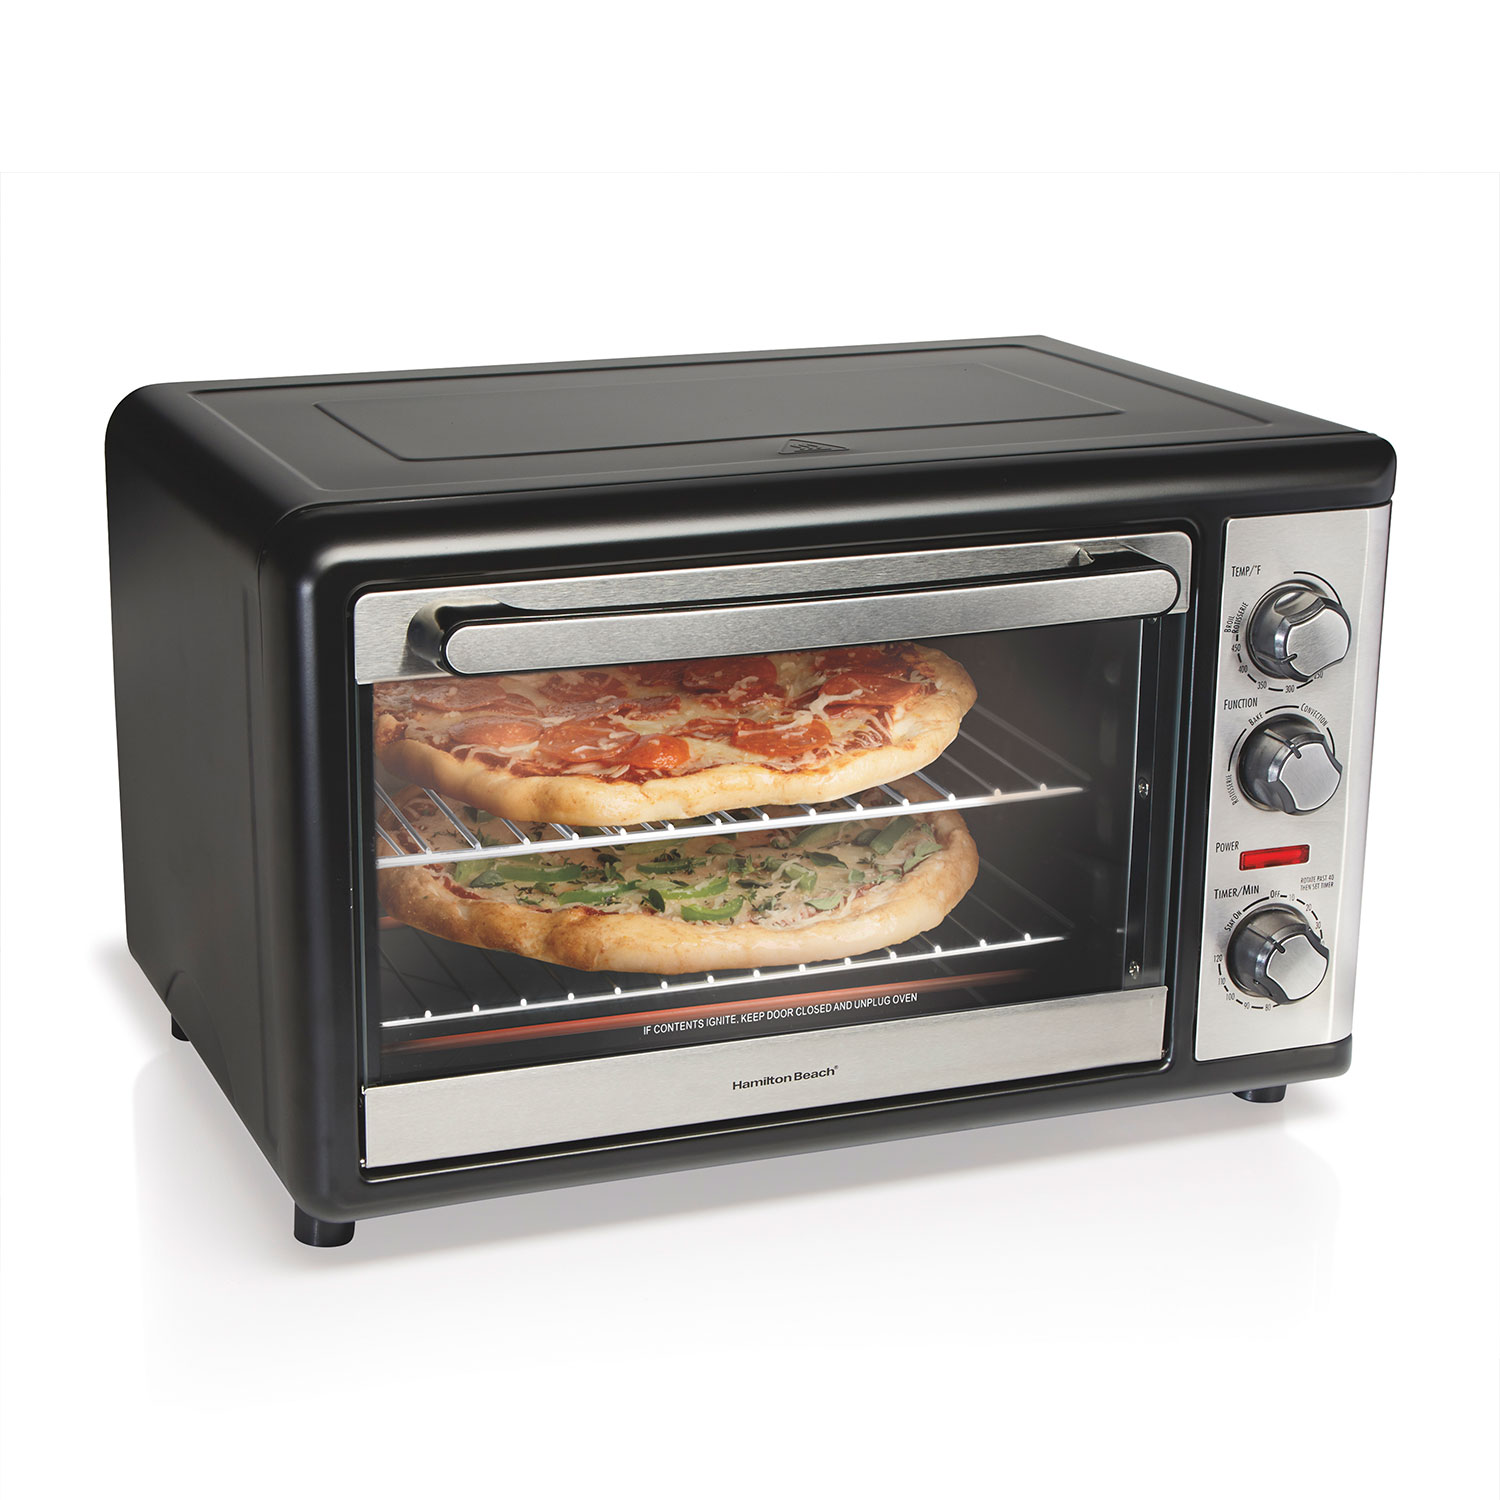 Revolving Rotisserie Countertop Oven with Convection (31108)